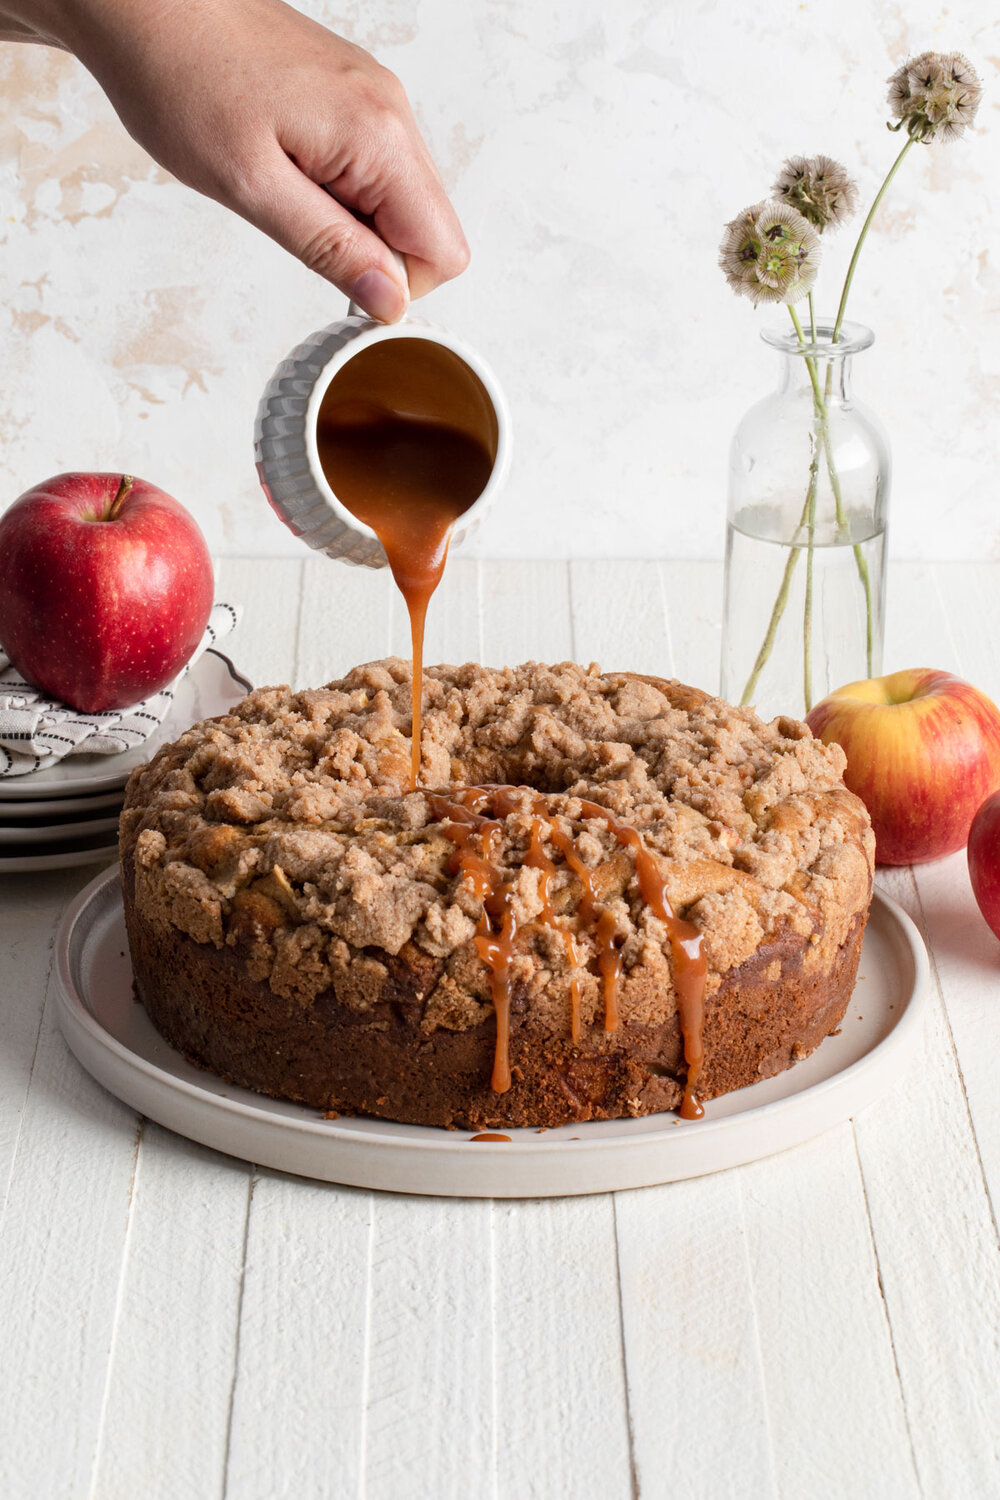 A baked apple coffee cake with caramel sauce being poured over the top.